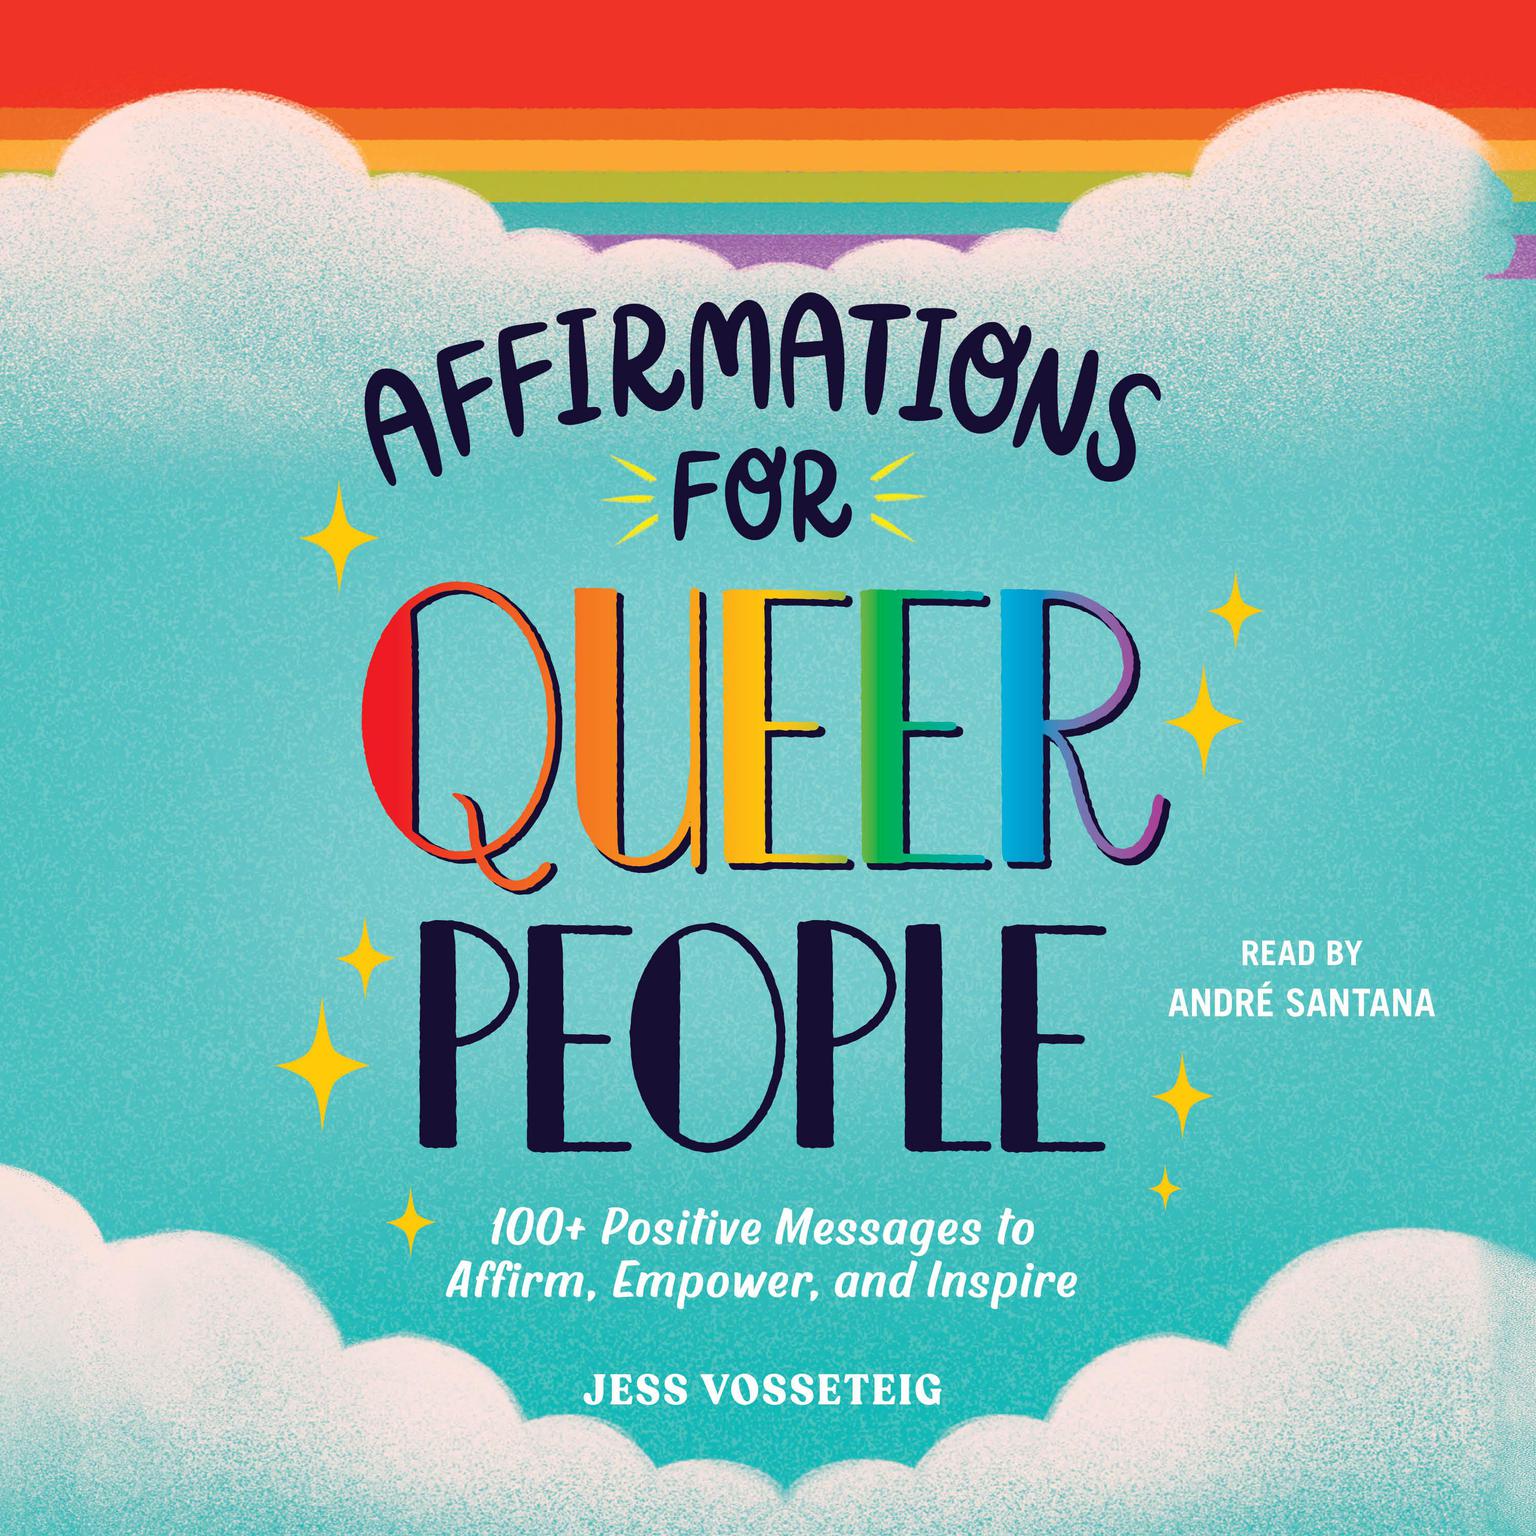 Affirmations for Queer People: 100+ Positive Messages to Affirm, Empower, and Inspire Audiobook, by Jess Vosseteig